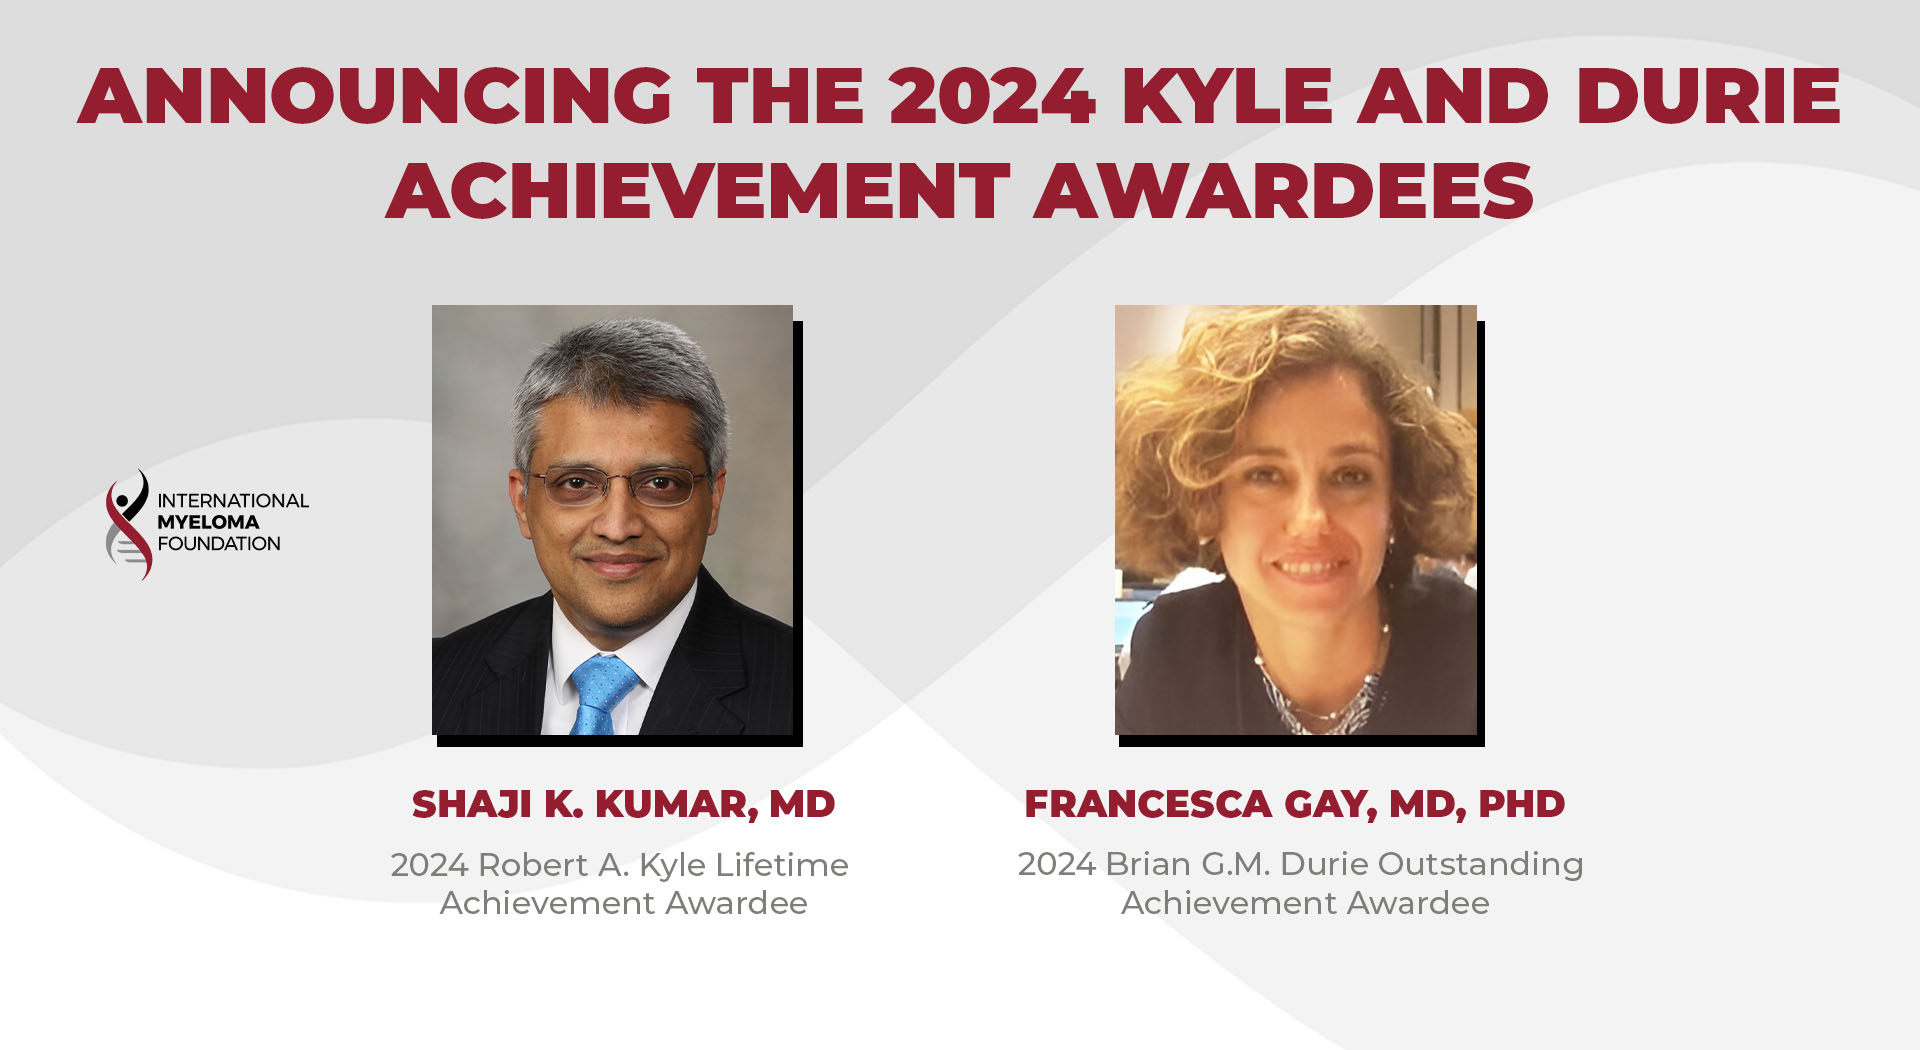 International Myeloma Foundation (IMF) to Honor 2024 Kyle and Durie Achievement Awardees, Dr. Shaji Kumar and Dr. Francesca Gay: Awarding ceremonies to be held on June 11 at the 15th Annual IMWG Summit in Madrid, Spain